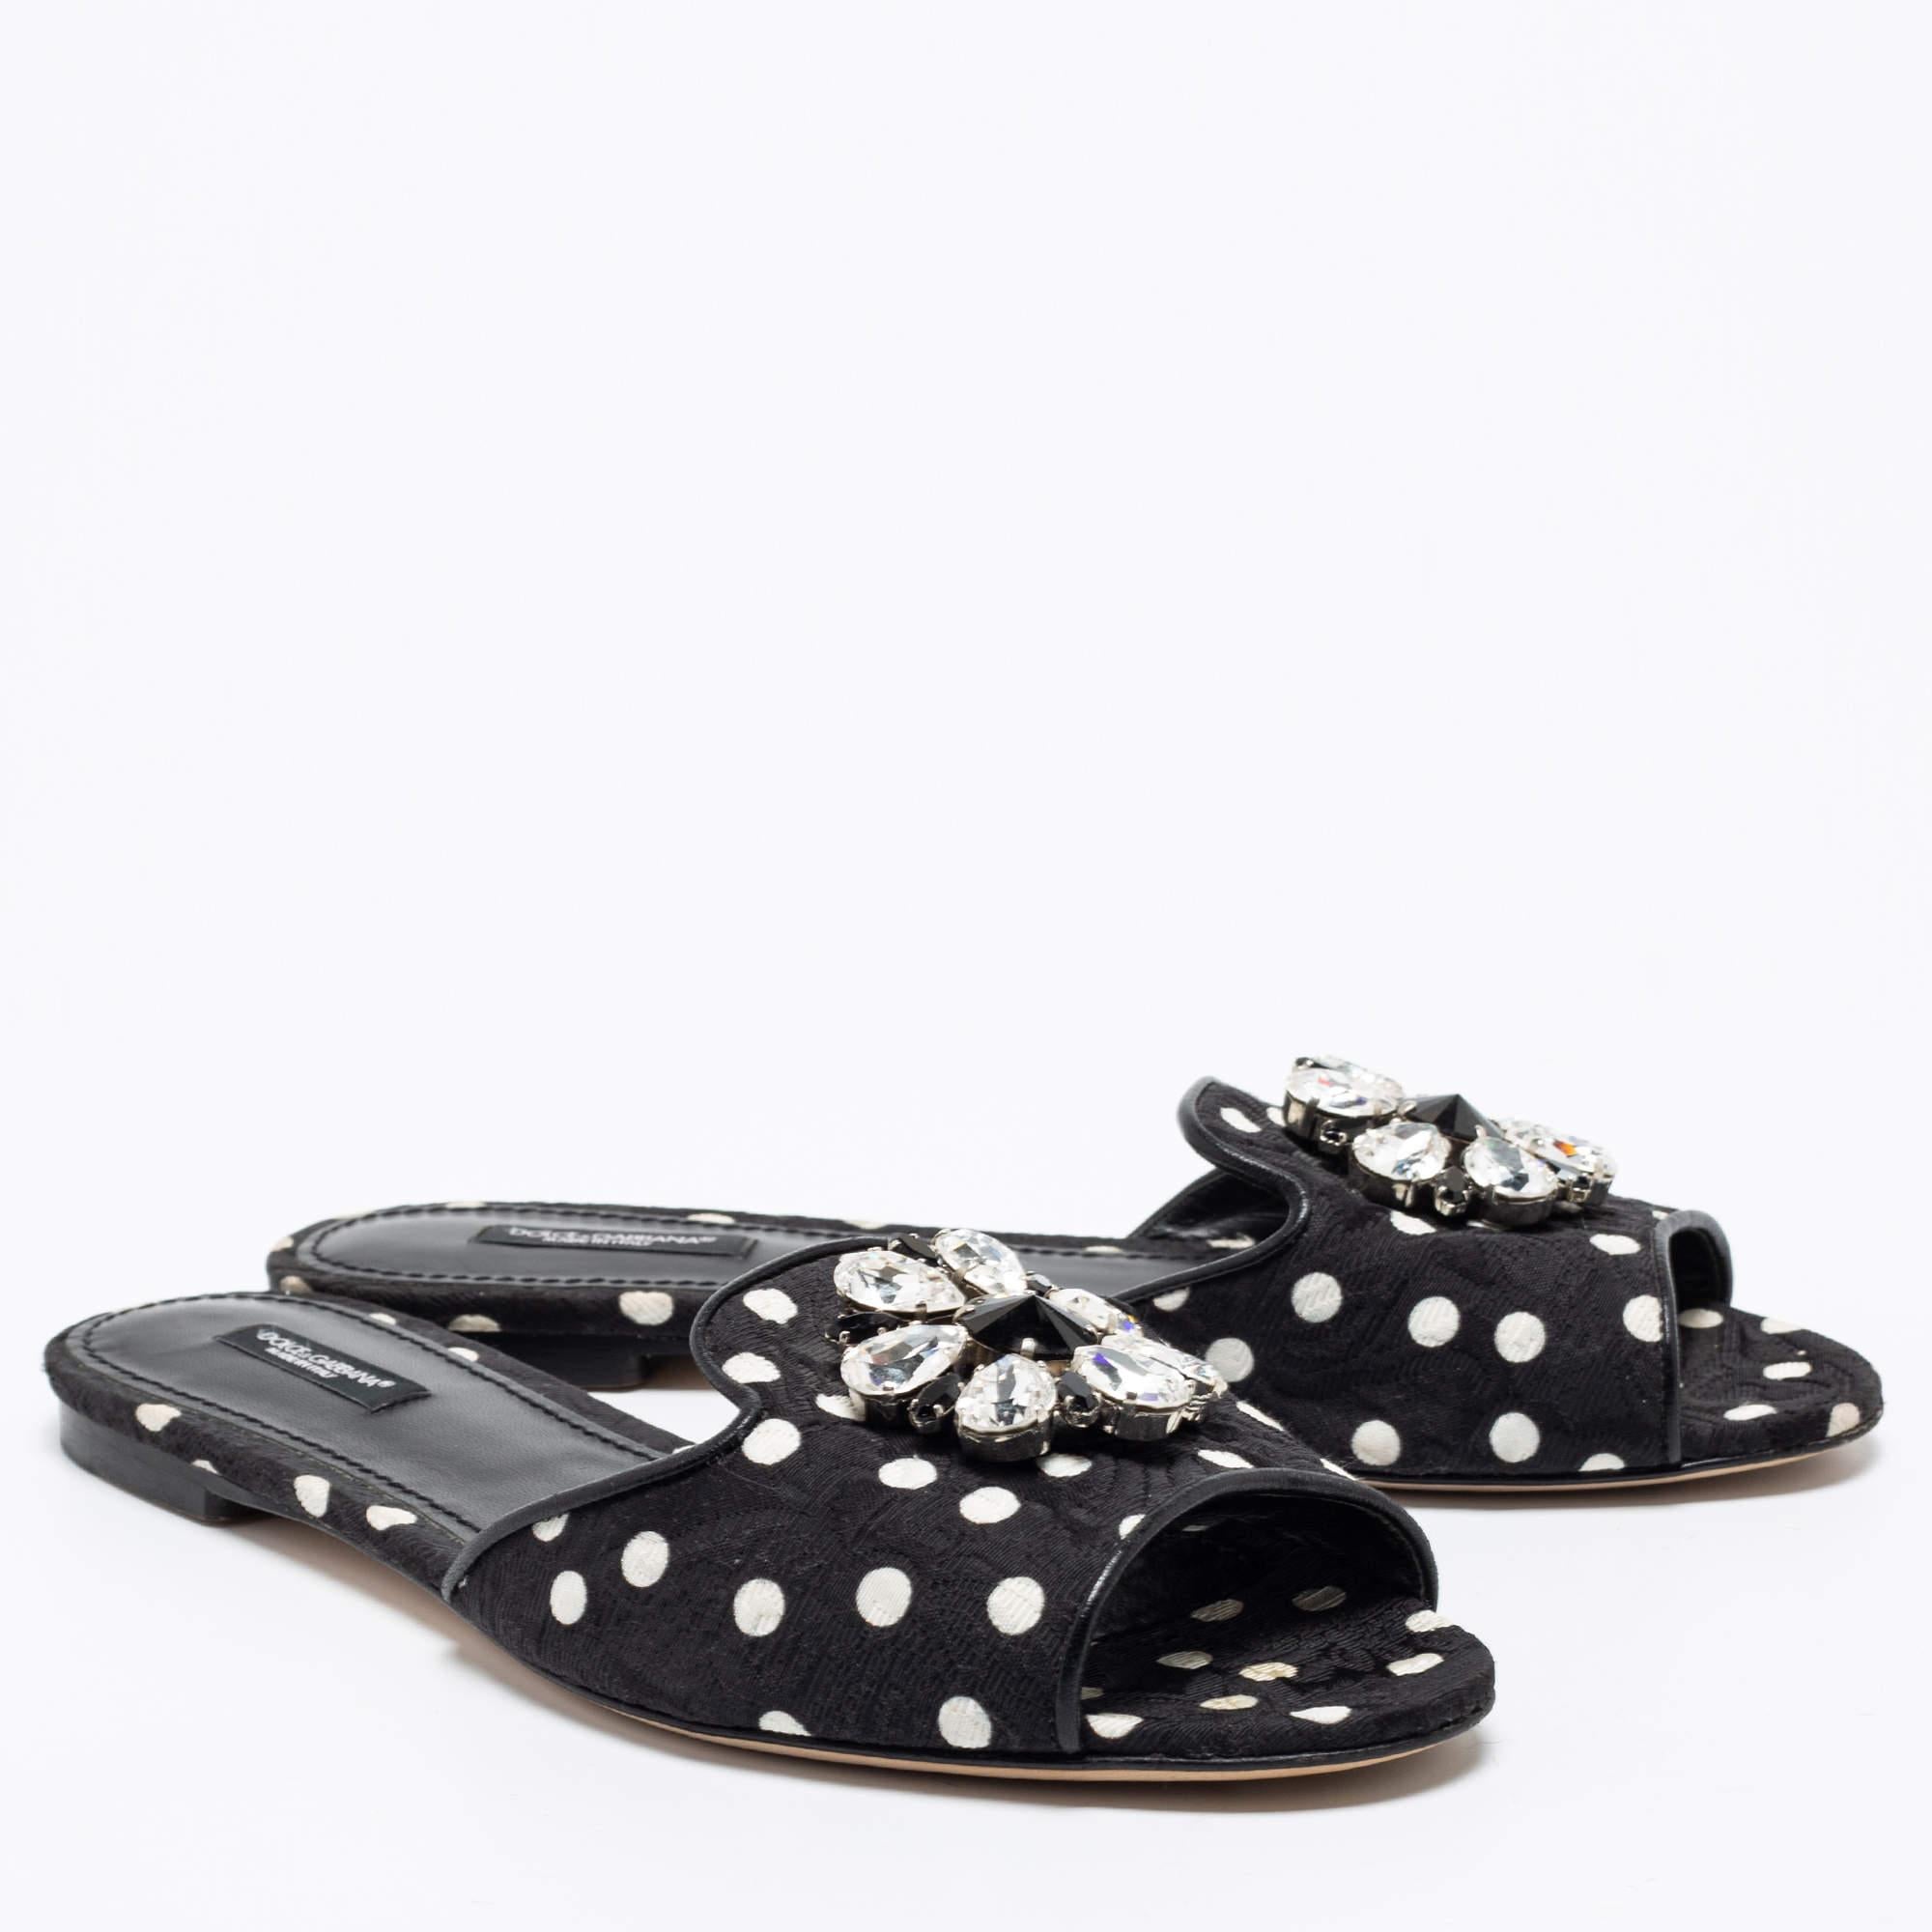 This beautiful pair of flats by Dolce & Gabbana will elevate any outfit. Designed to deliver glamour and style, these flats are crafted from black & white polka dot fabric. These slides feature an open-toe silhouette, uppers adorned with crystal